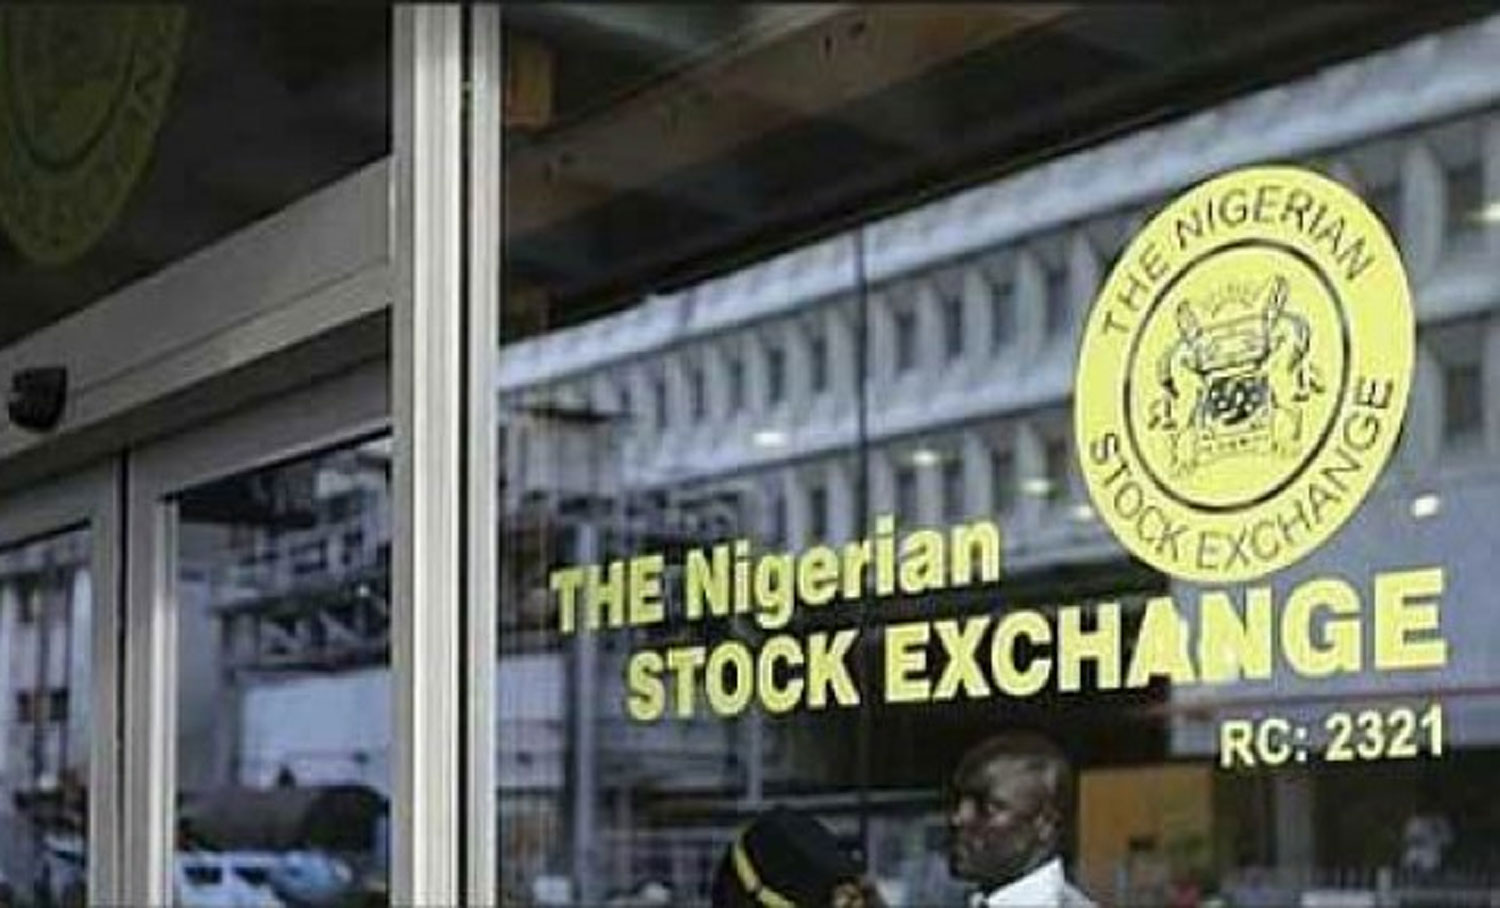 11 Plc plans delisting from NSE after 43 years